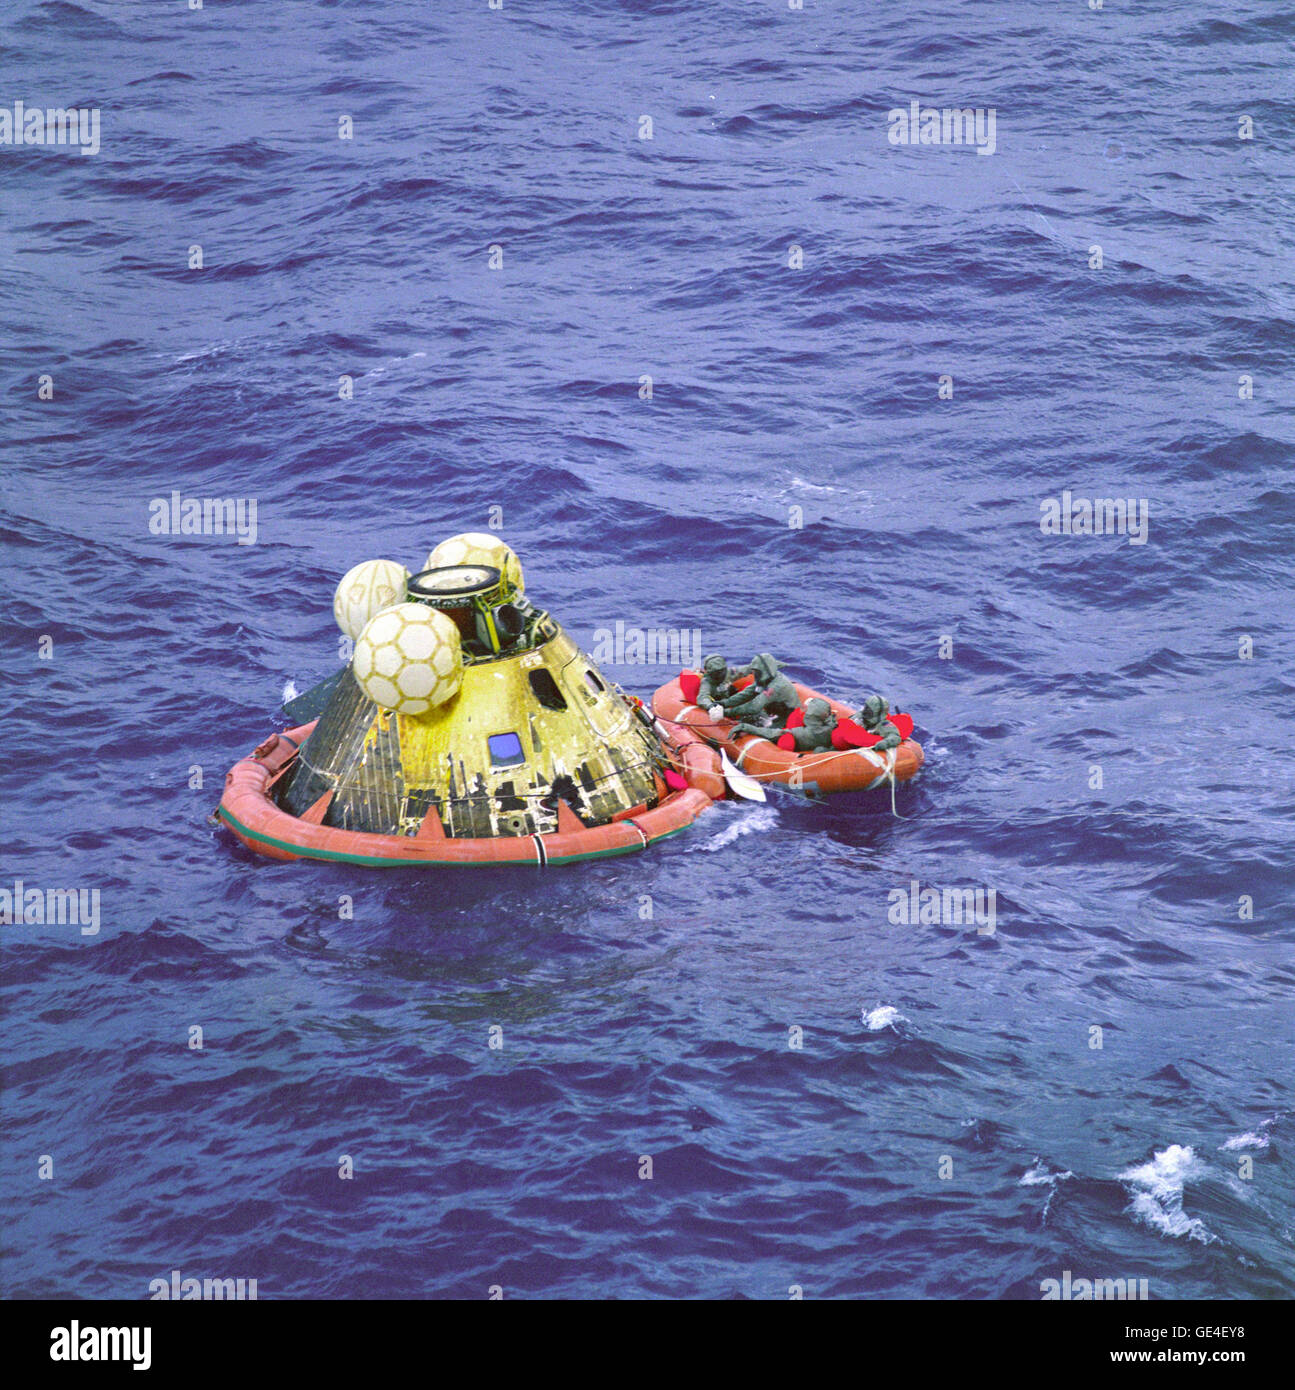 (July 24, 1969) The Apollo 11 crew await pickup by a helicopter from the USS Hornet, prime recovery ship for the historic Apollo 11 lunar landing mission. The fourth man in the life raft is a United States Navy underwater demolition team swimmer. All four men are wearing Biological Isolation Garments (BIG). The Apollo 11 Command Module &quot;Columbia,&quot; with astronauts Neil A. Armstrong, Michael Collins, and Edwin E. Aldrin Jr. splashed down at 11:49 a.m. (CDT), July 24, 1969, about 812 nautical miles southwest of Hawaii and only 12 nautical miles from the USS Hornet.  Image # : S69-21698 Stock Photo